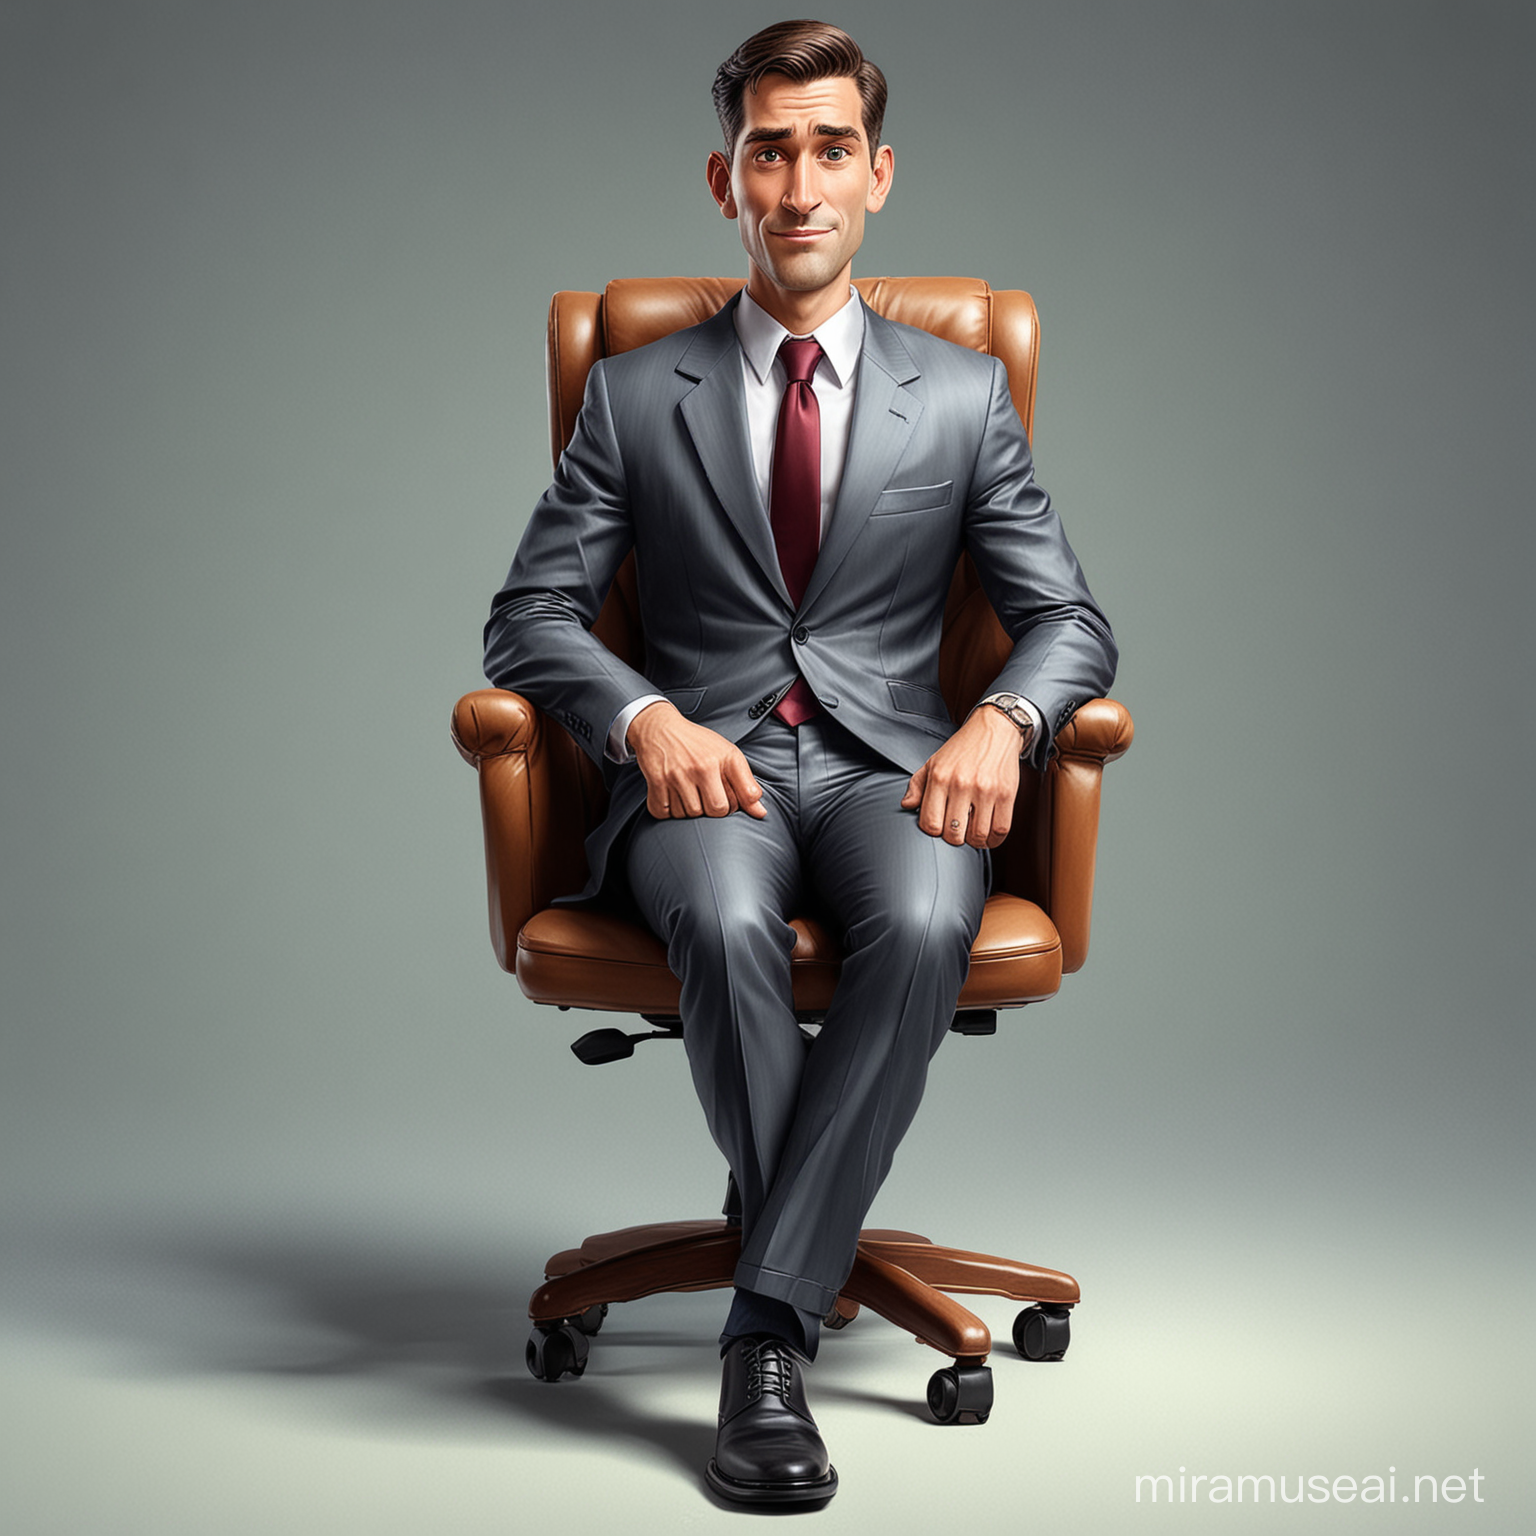 Cartoon caricature of a man full body sitting on office chair wearung 3 piece suit office background, highly detailed 3D artwork, oil painting style
